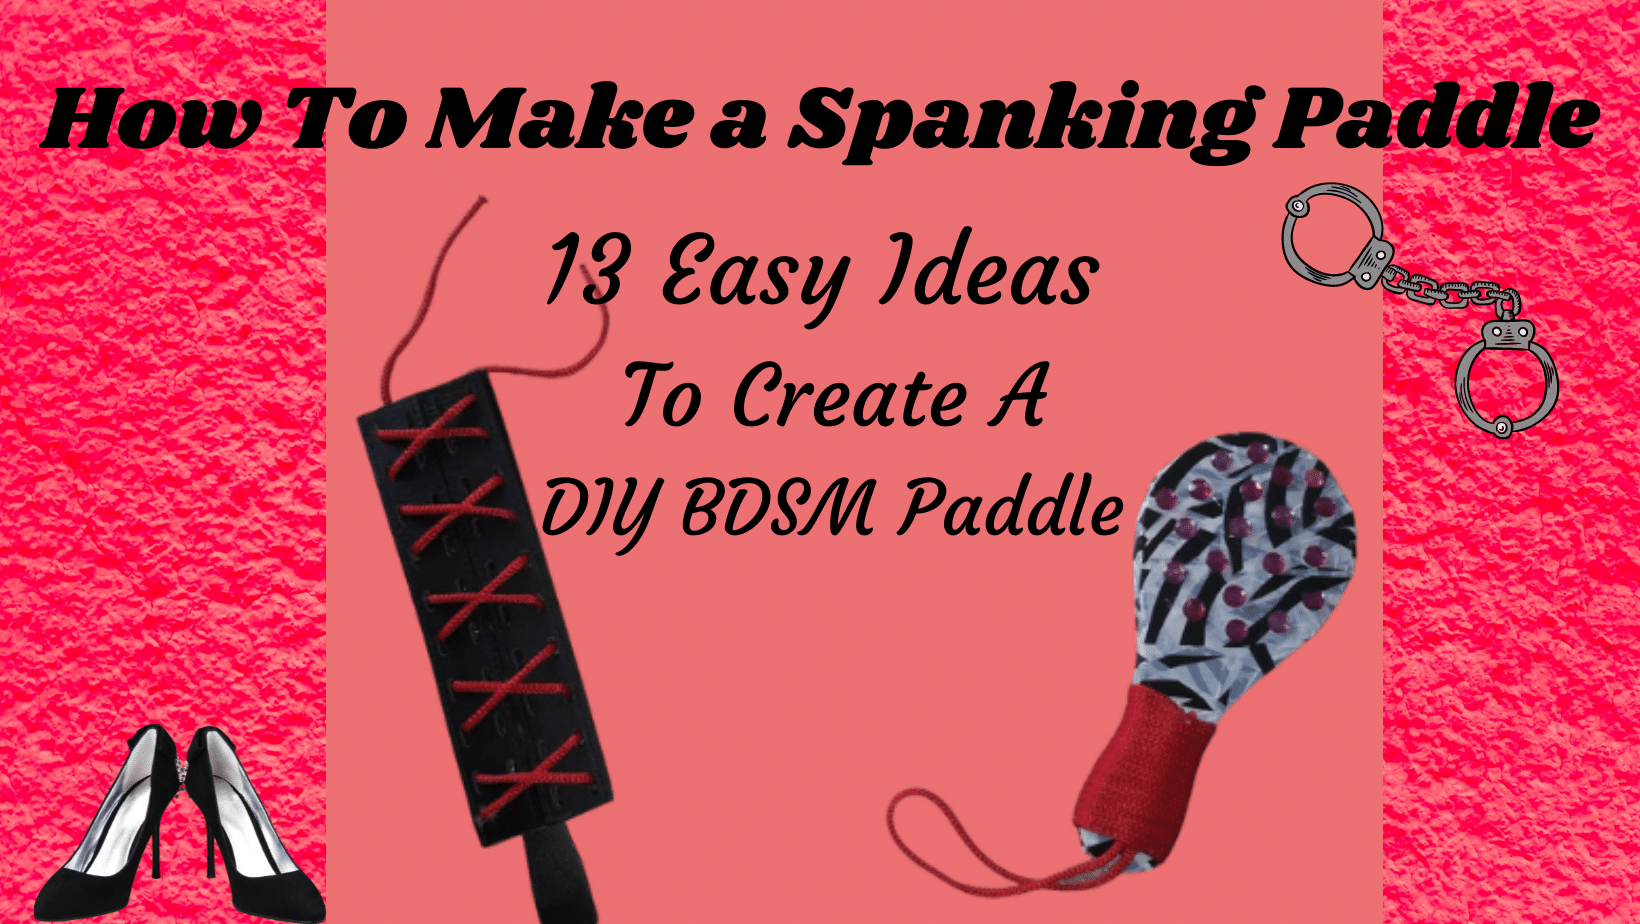 How to Make a Spanking Paddle: 13 Easy Ideas to Create a DIY BDSM Paddle